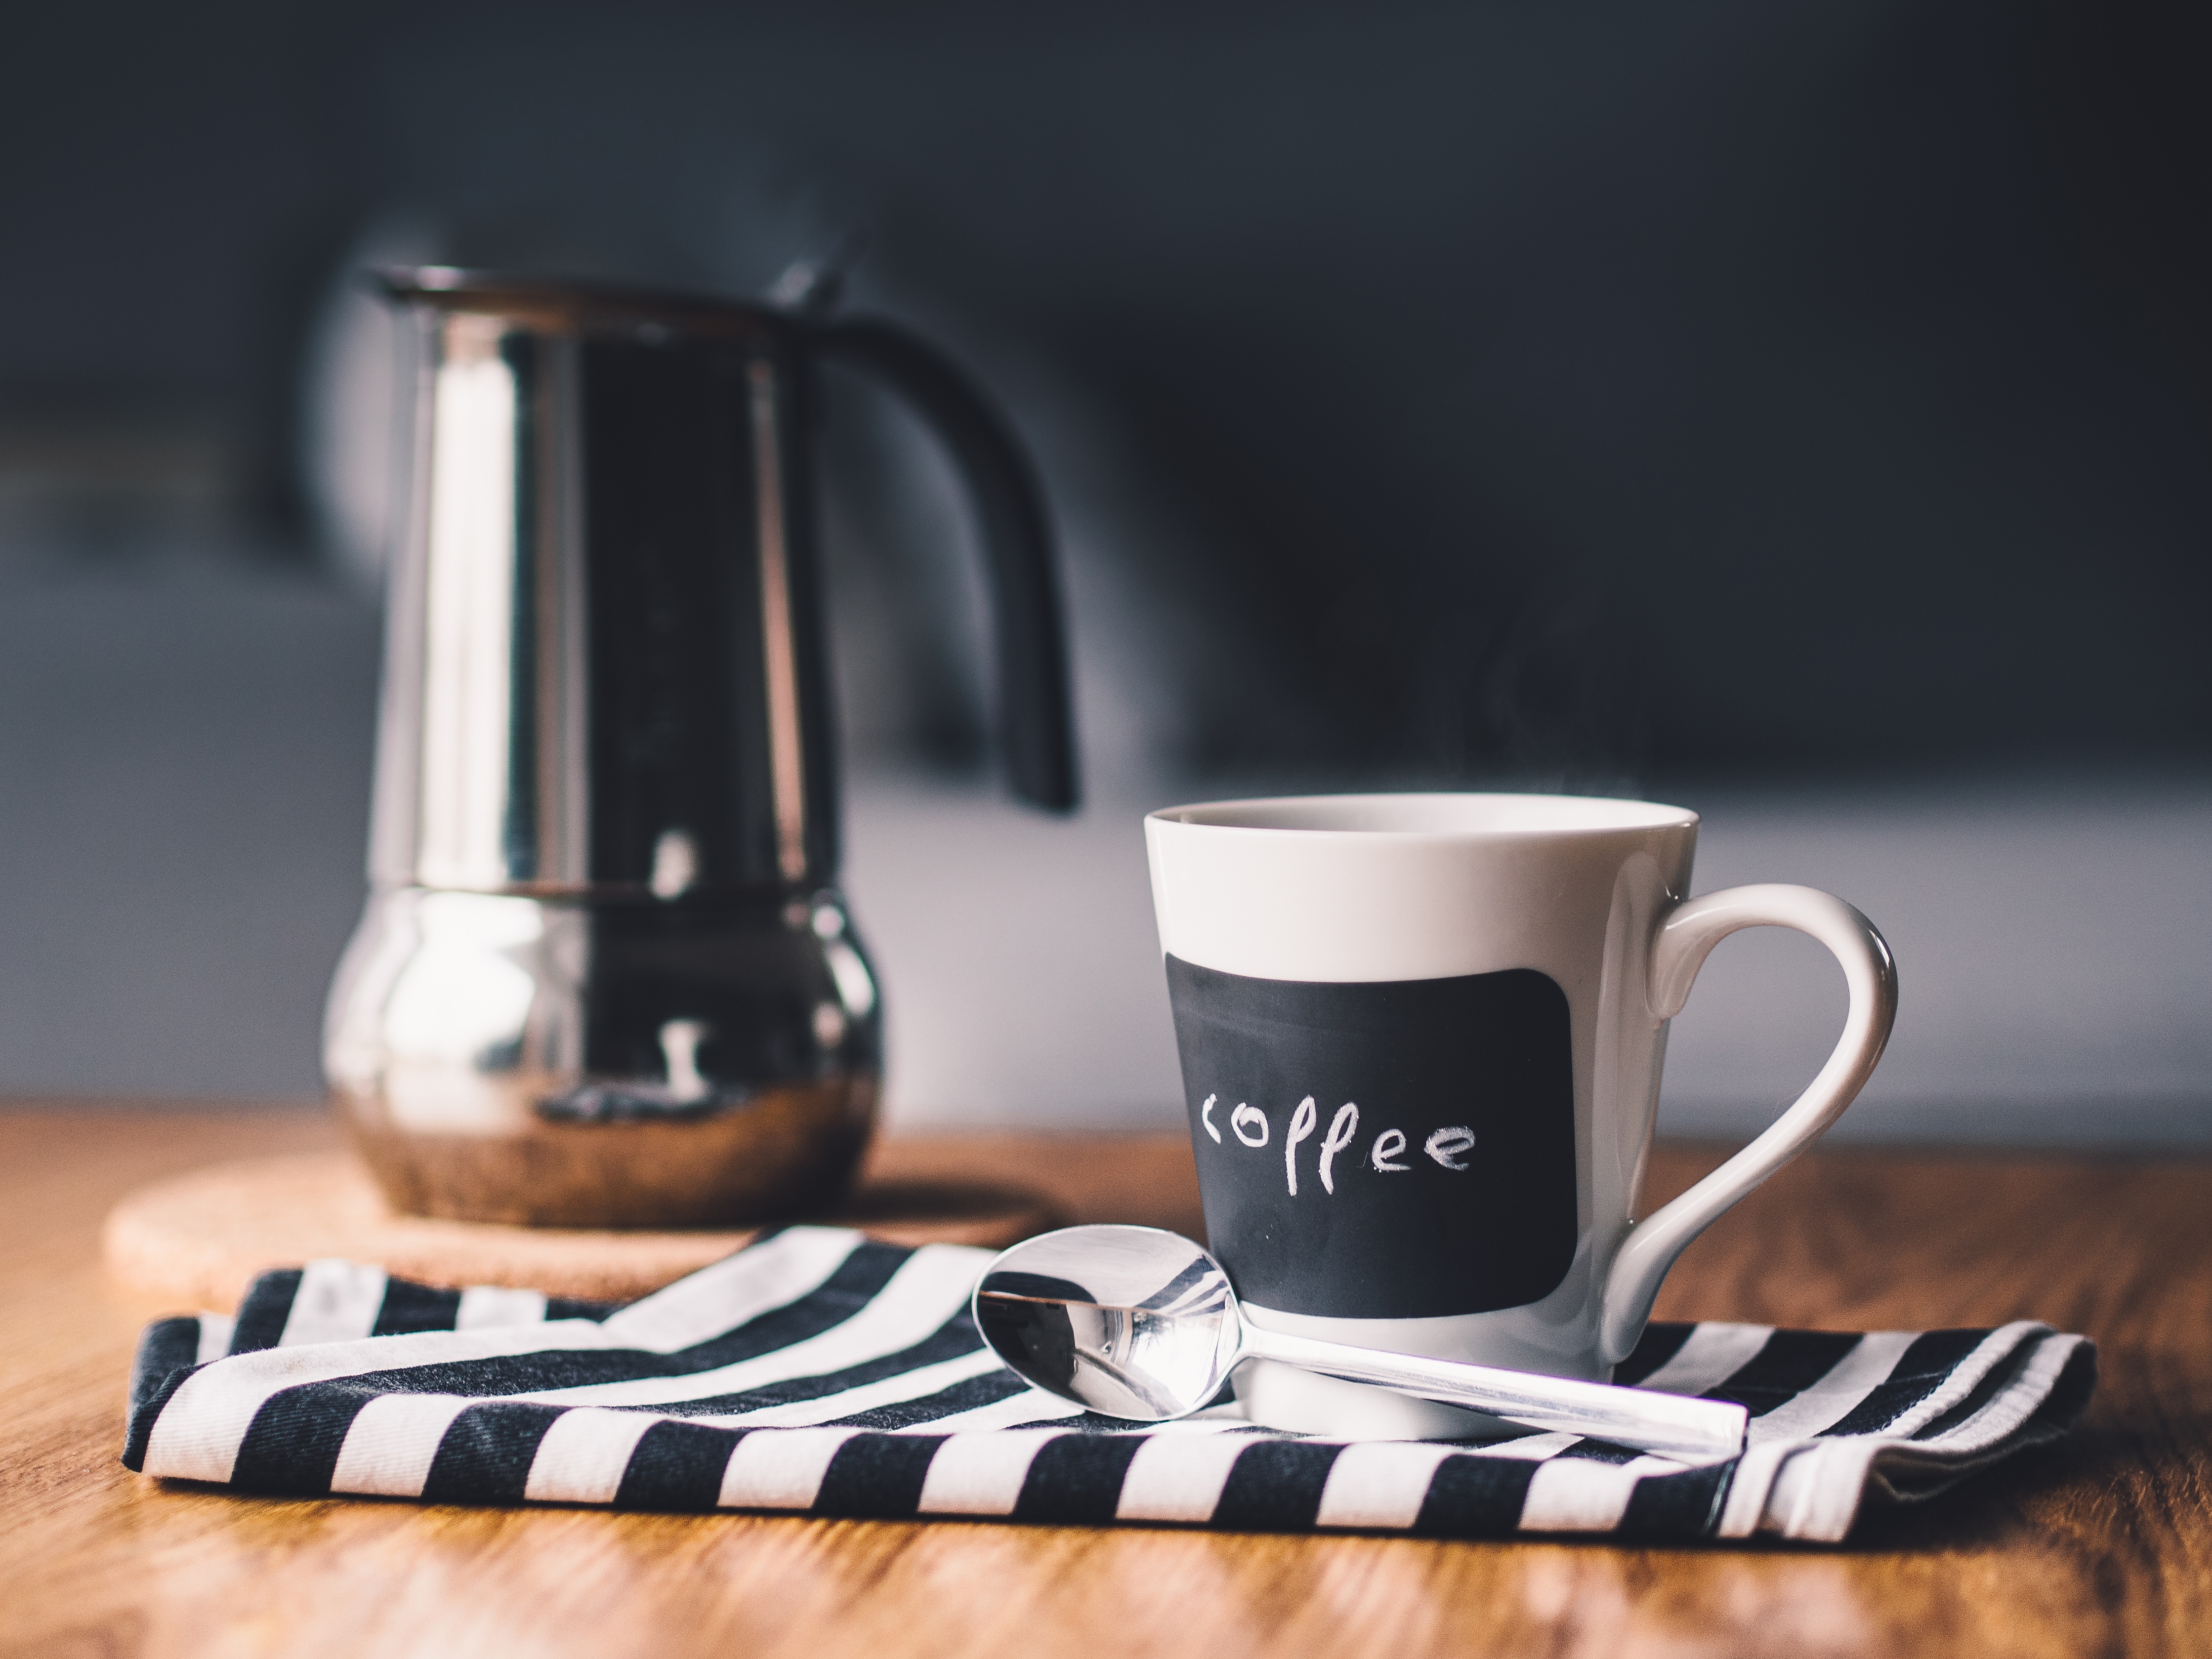 coffee, food, cup, teapot, kettle Image for desktop